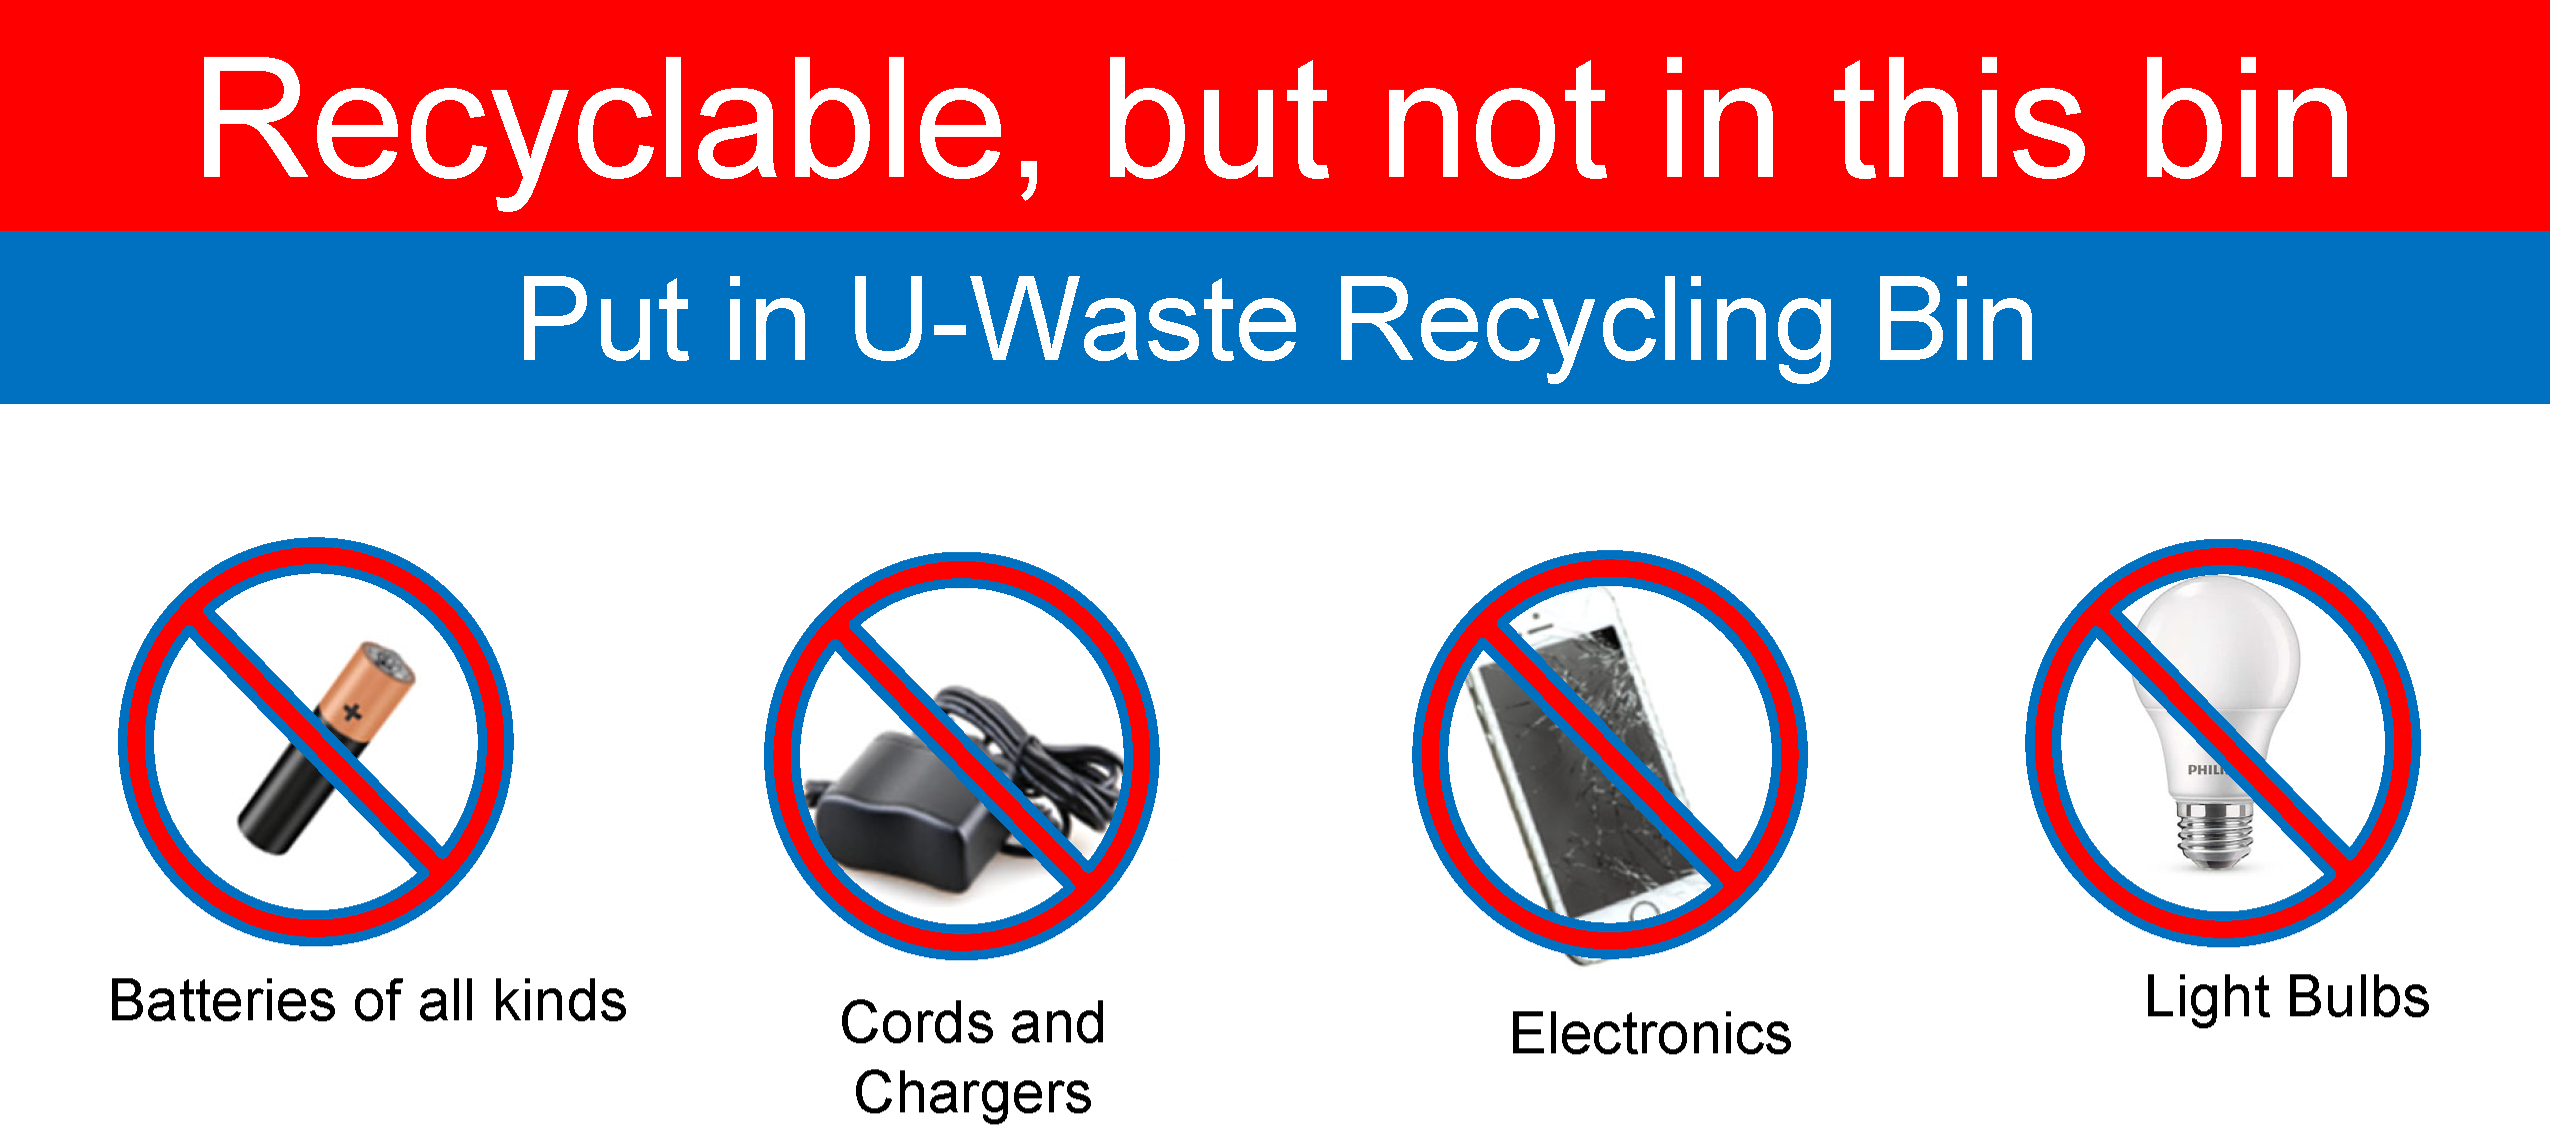 List of items that can be recycled in the universal waste bin, but not in the mixed recycling bin